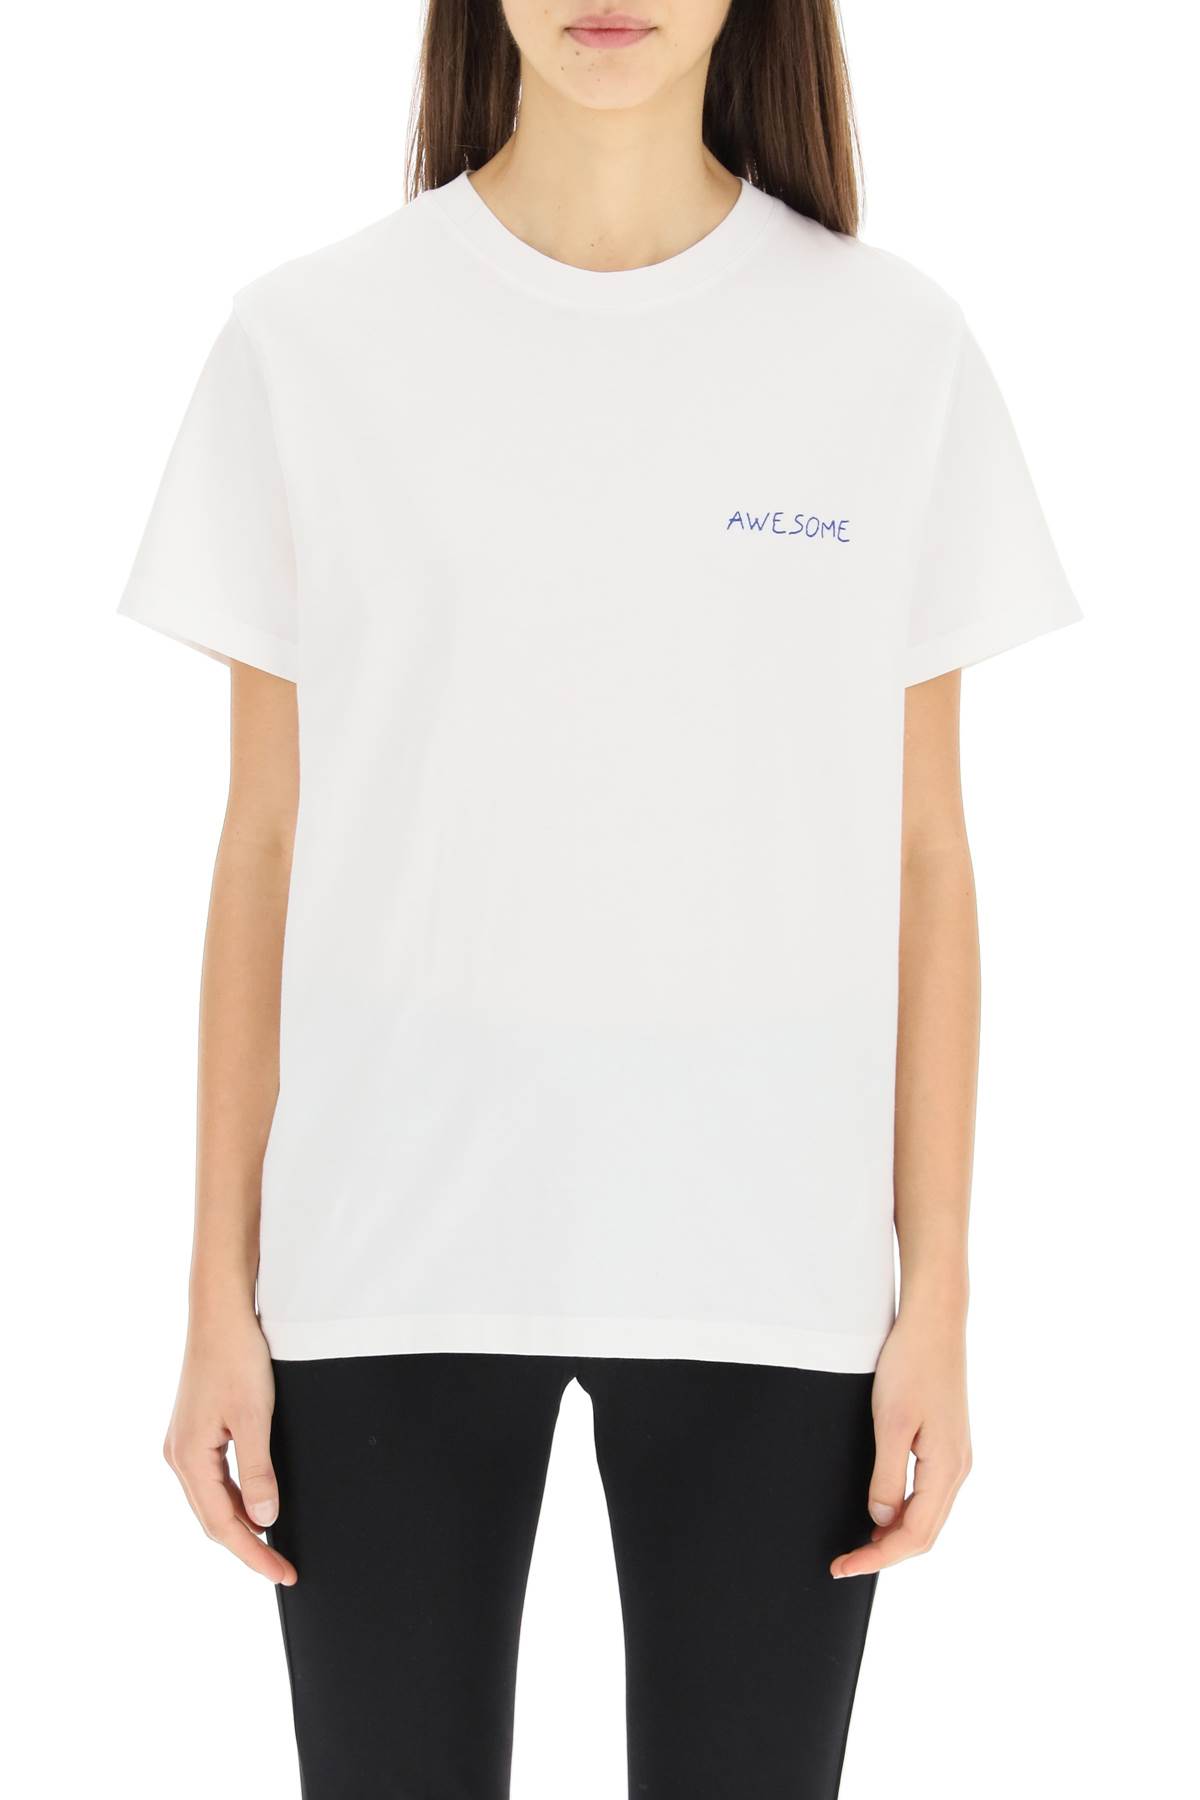 Maison Labiche Popincourt T-shirt With Awesome Embroidery In White 